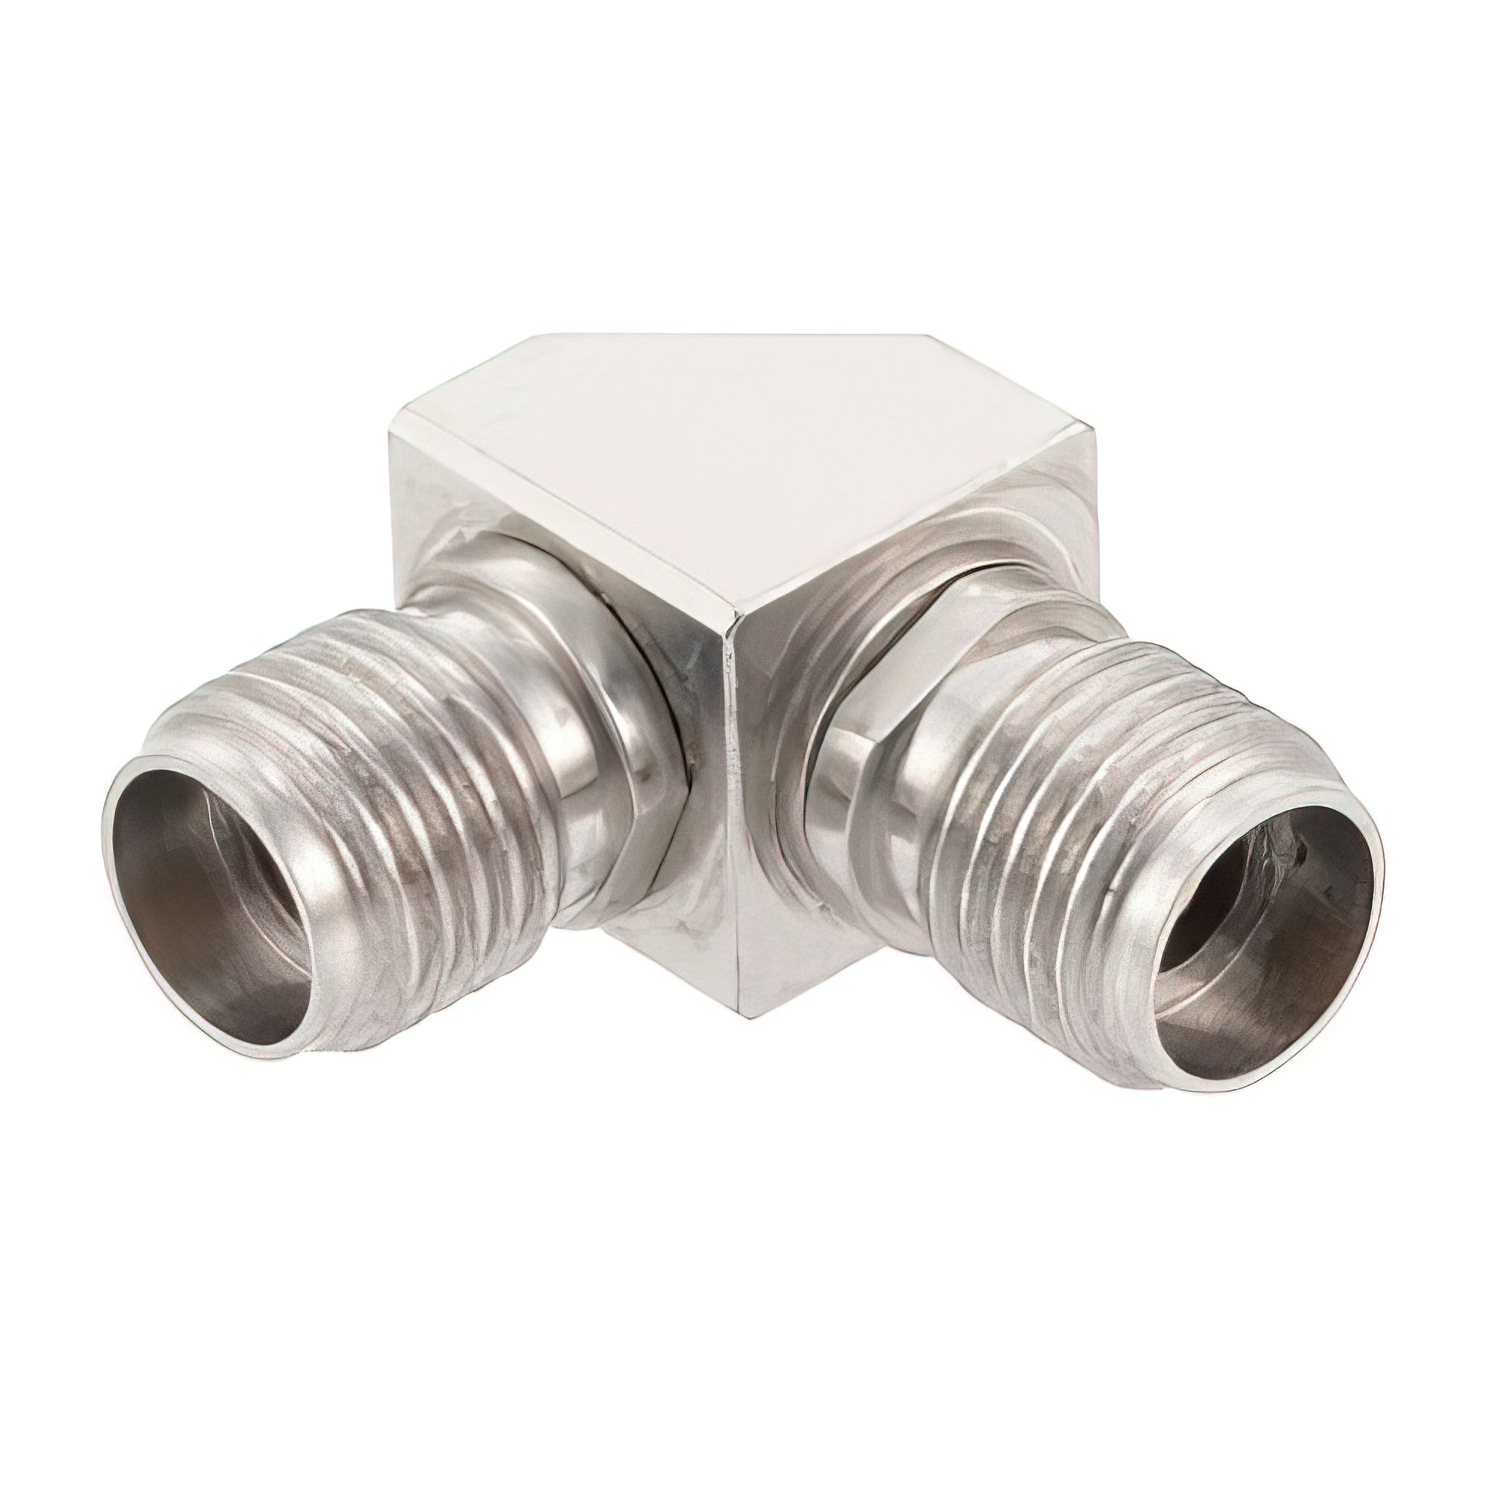 2.92mm Female to 2.92mm Female Miter Right Angle Adapter1